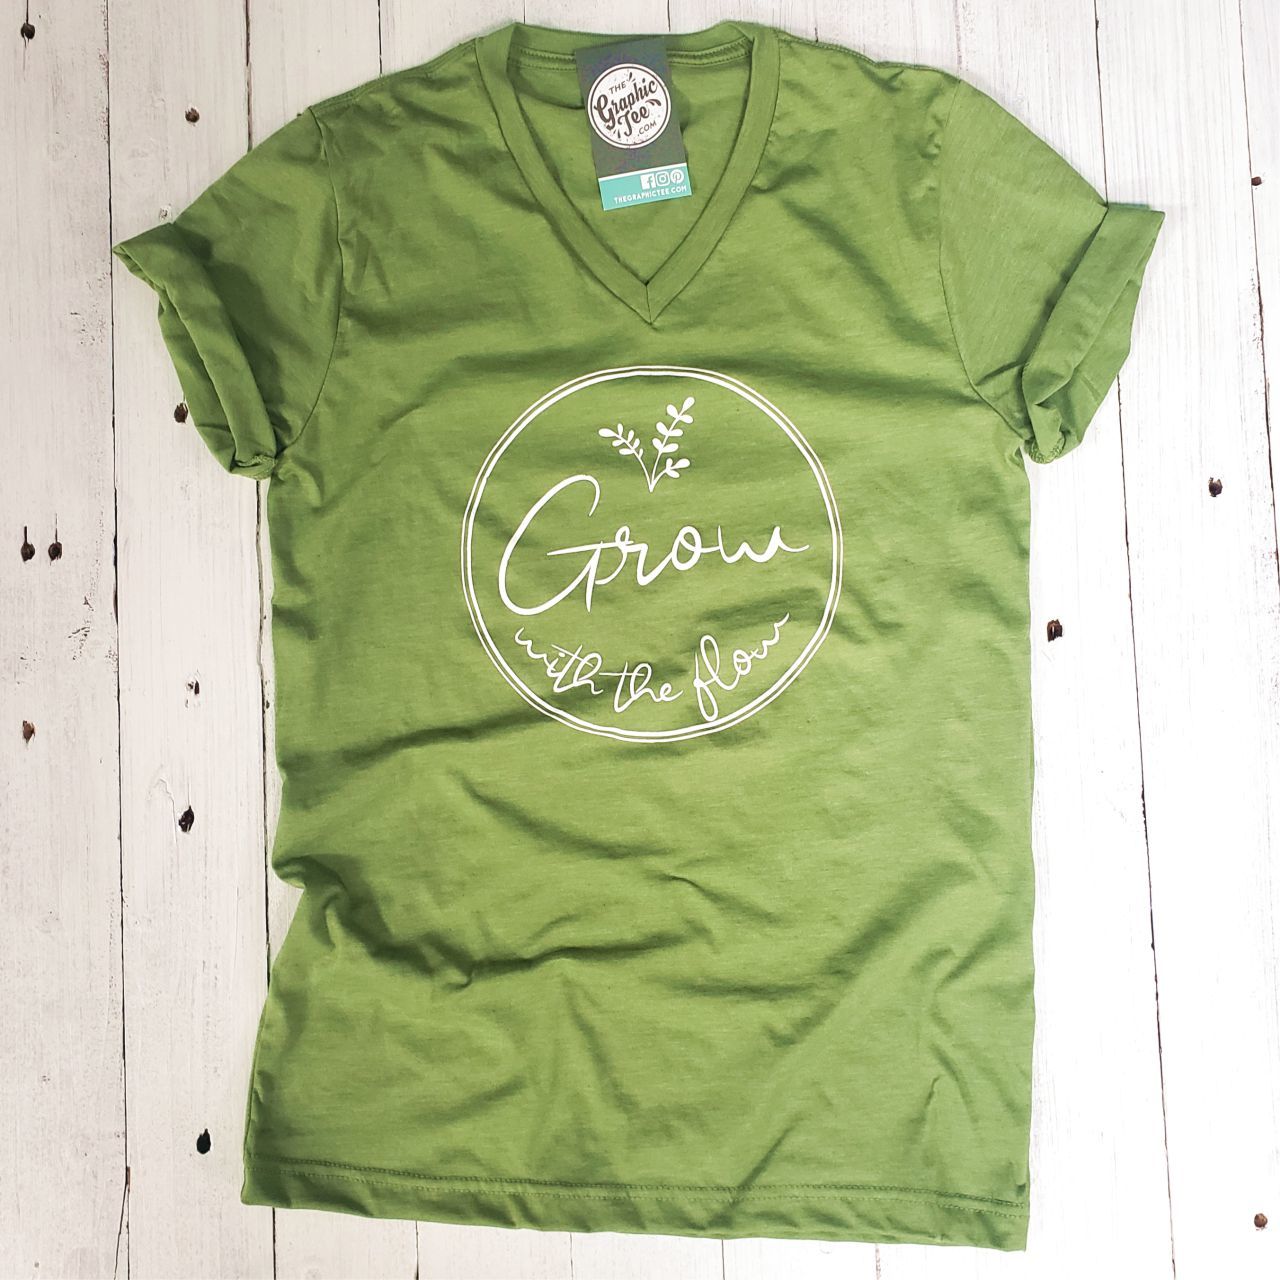 Grow with the Flow - Unisex V-neck Tee - The Graphic Tee